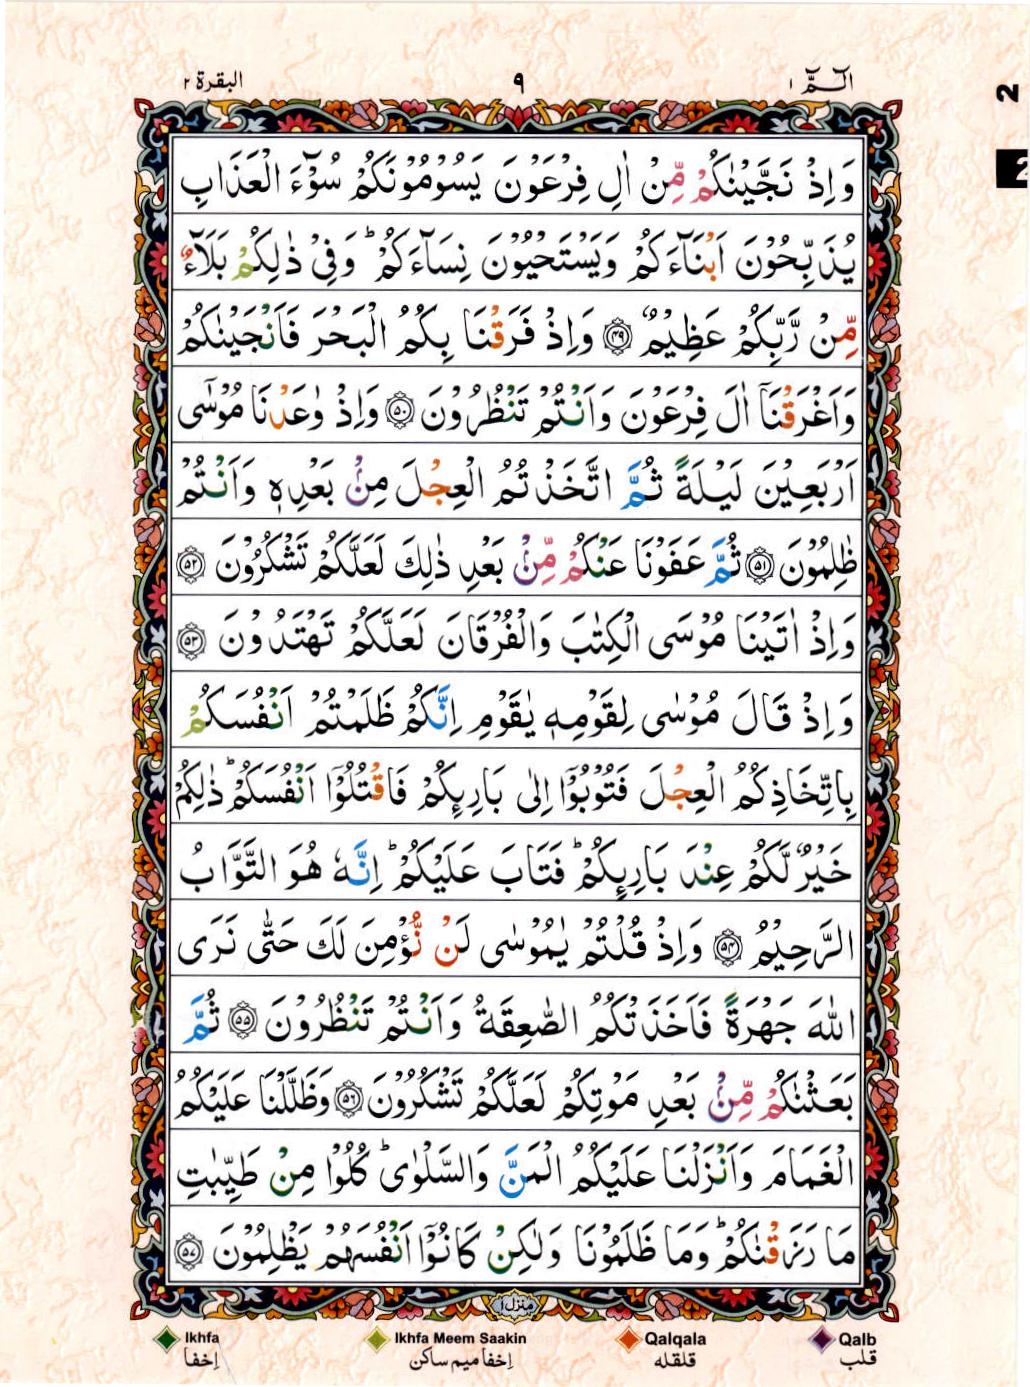 Read 15 Lines Coloured Coded Quran Part 1 Page No 9, Practice Quran